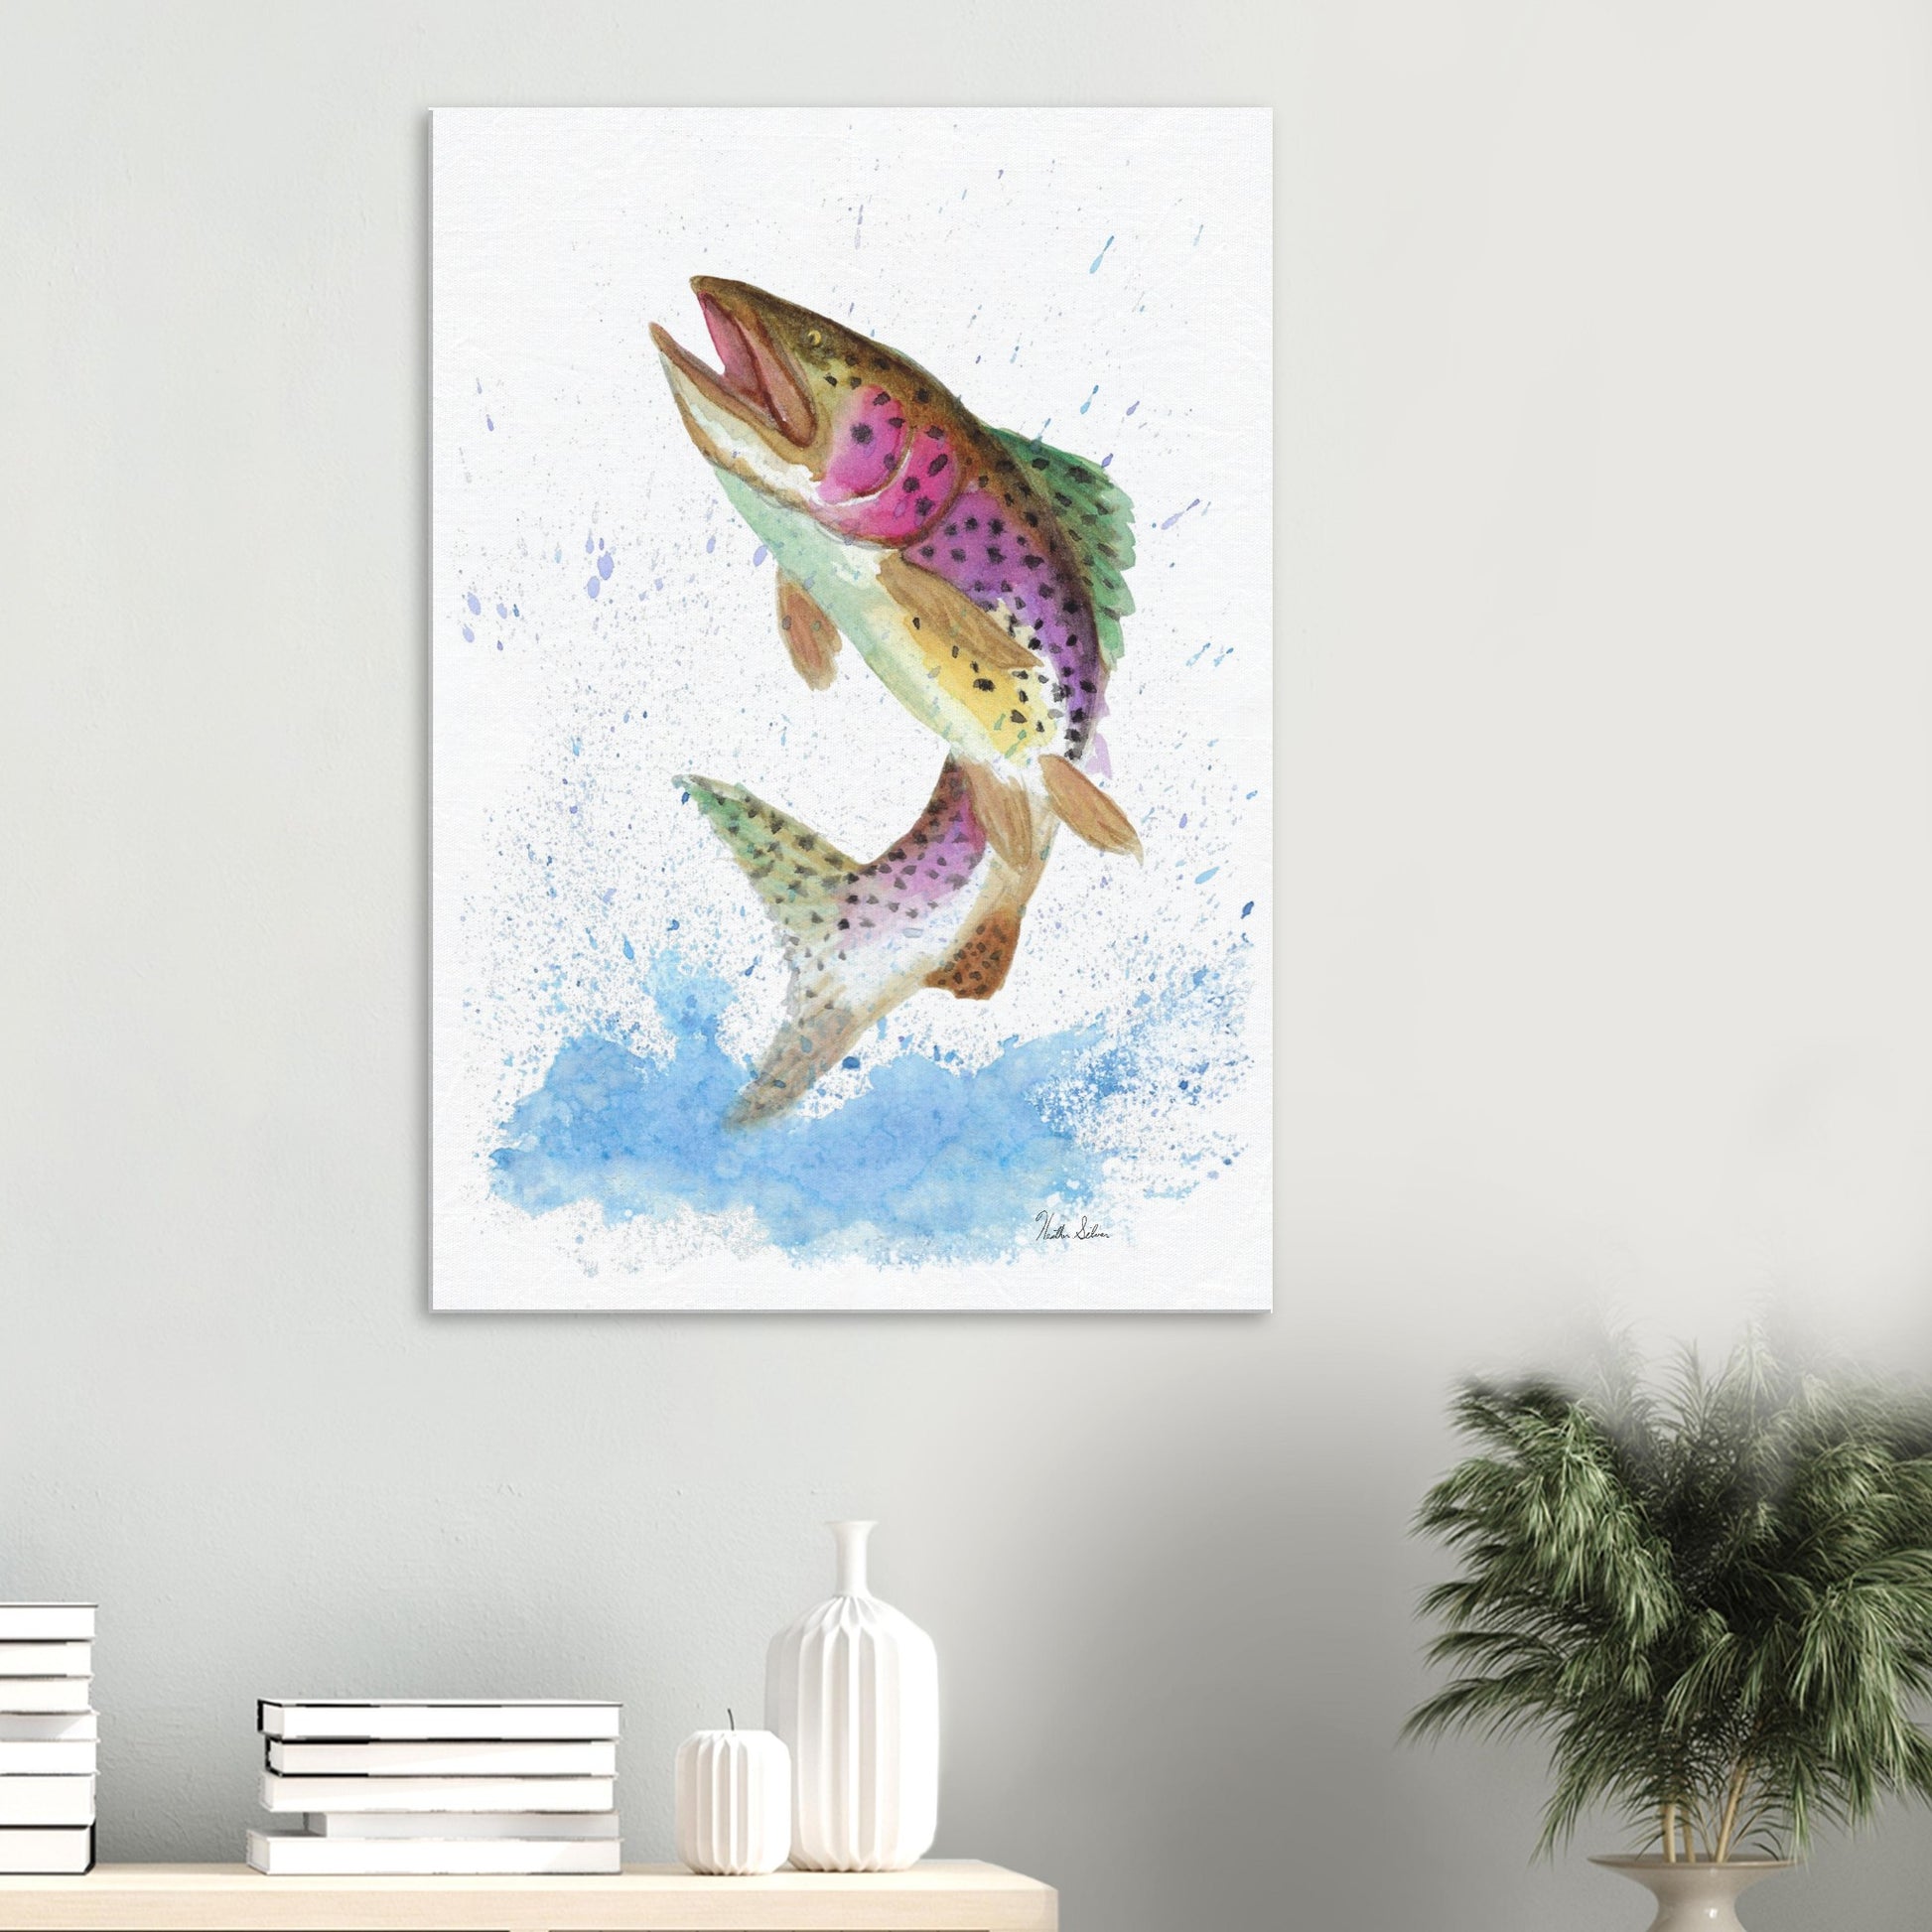 28 by 40 inch slim canvas wall art print featuring a watercolor painting of a rainbow trout leaping from the water. Shown on wall above tabletop with books and potted plant.